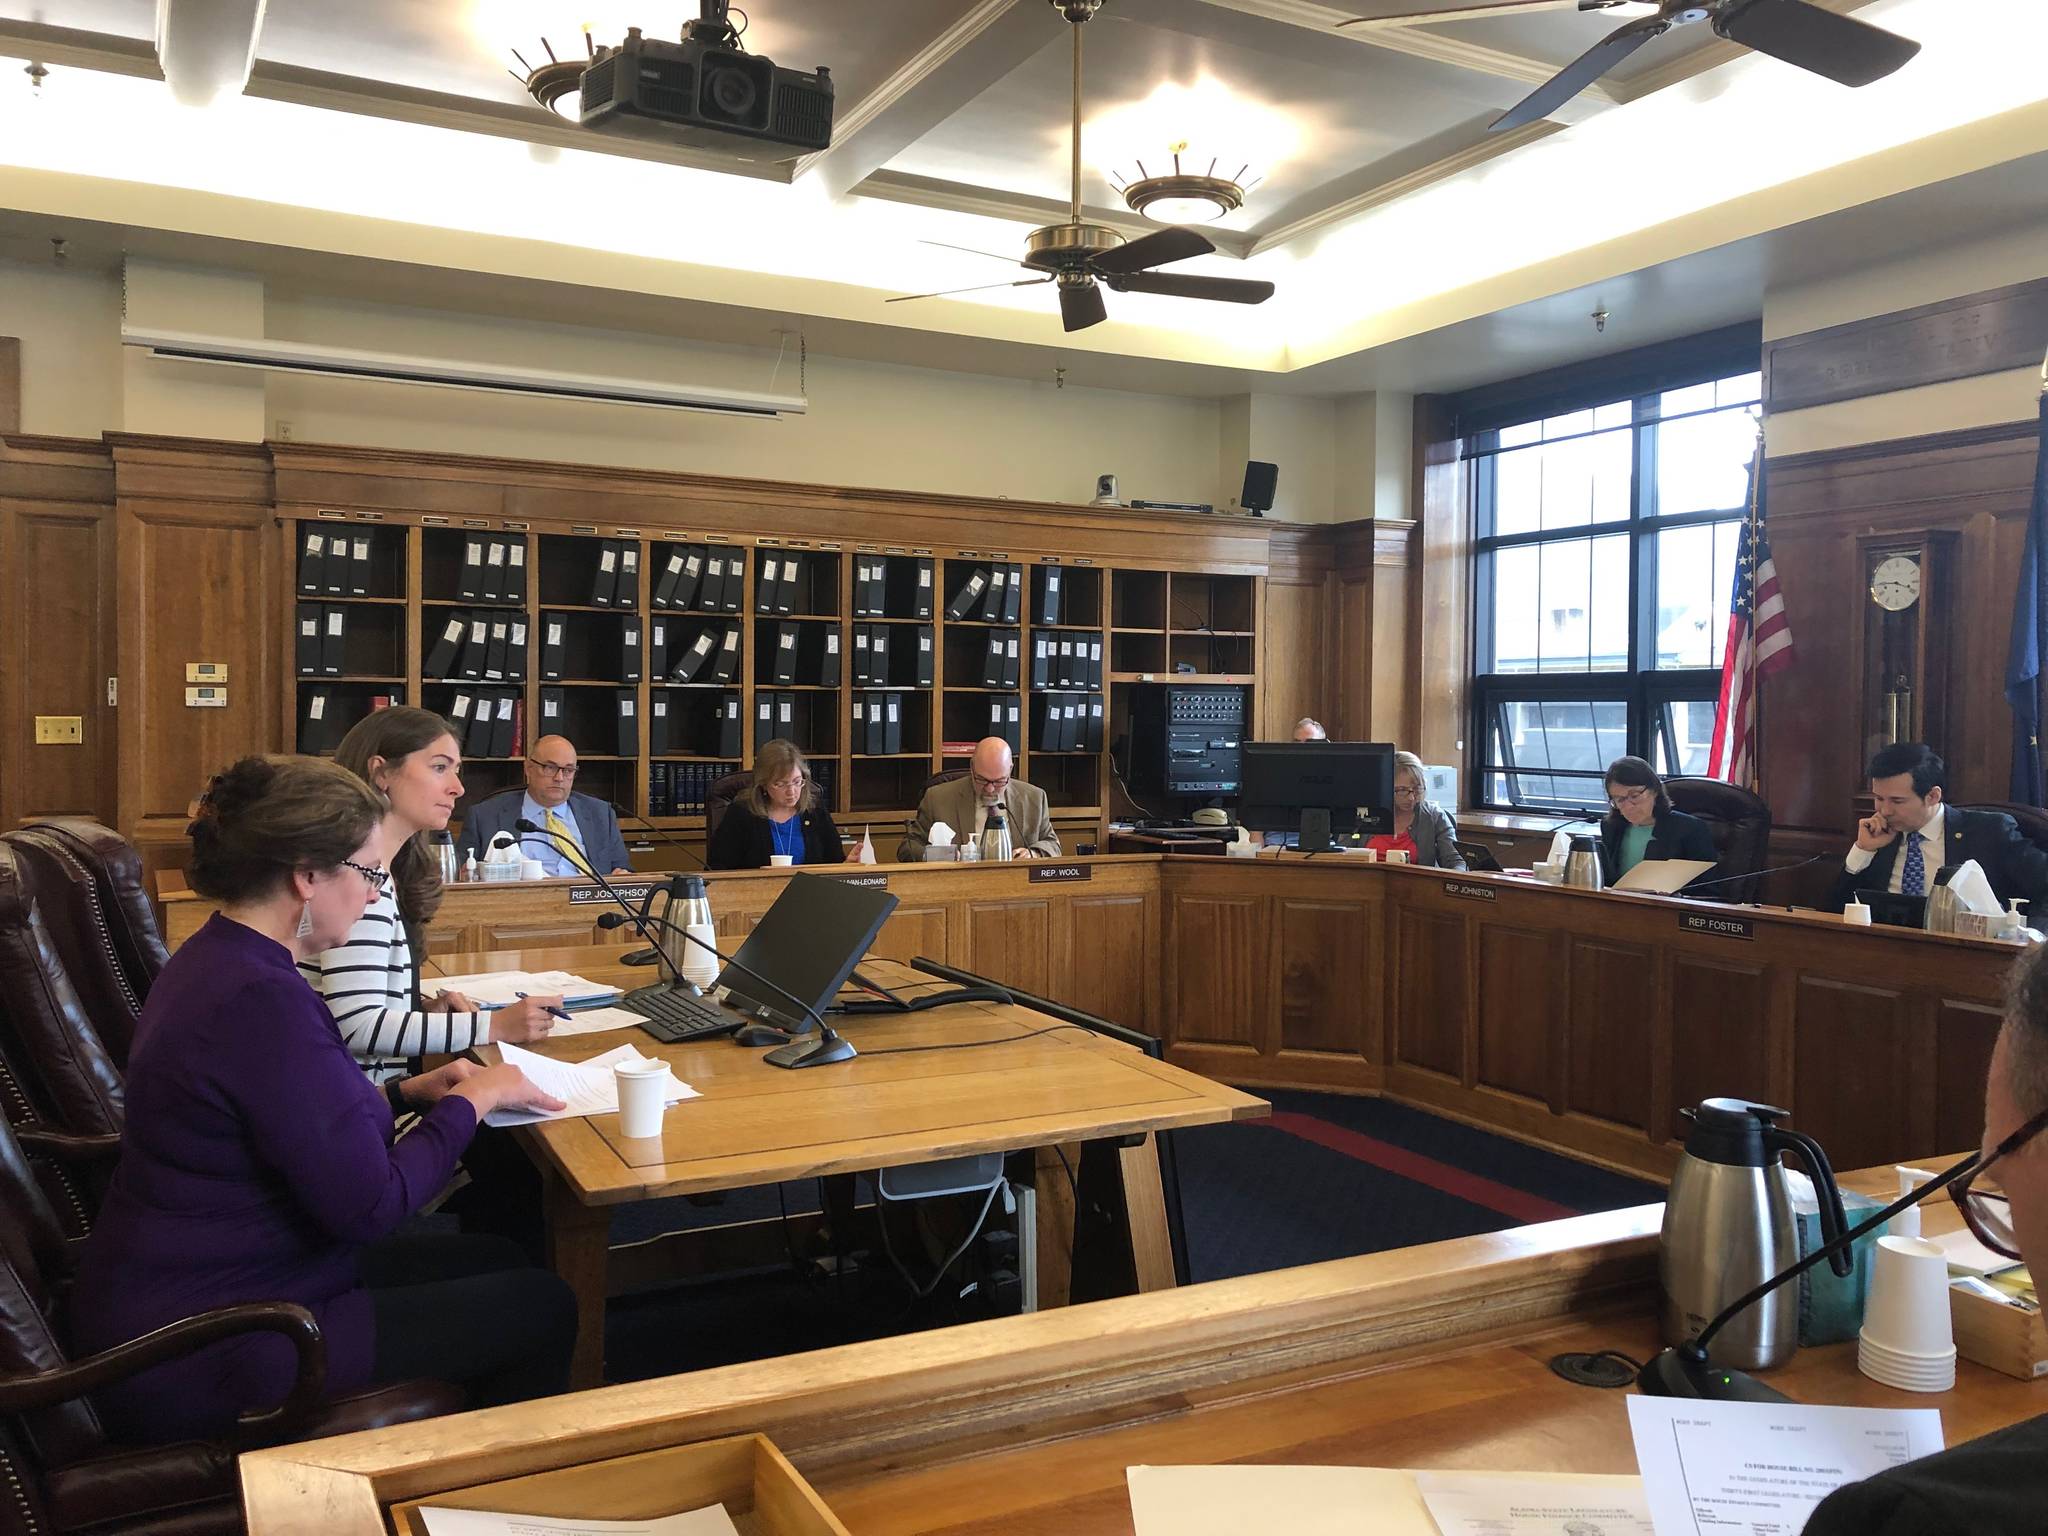 Erin Shine, in white, from Rep. Jennifer Johnston’s staff, and Amanda Ryder, in blue, from the Legislative Finance Division give testimony to the House Finance Committee on House Bill 2003 on Thursday, July 25, 2019. (Peter Segall | Juneau Empire)